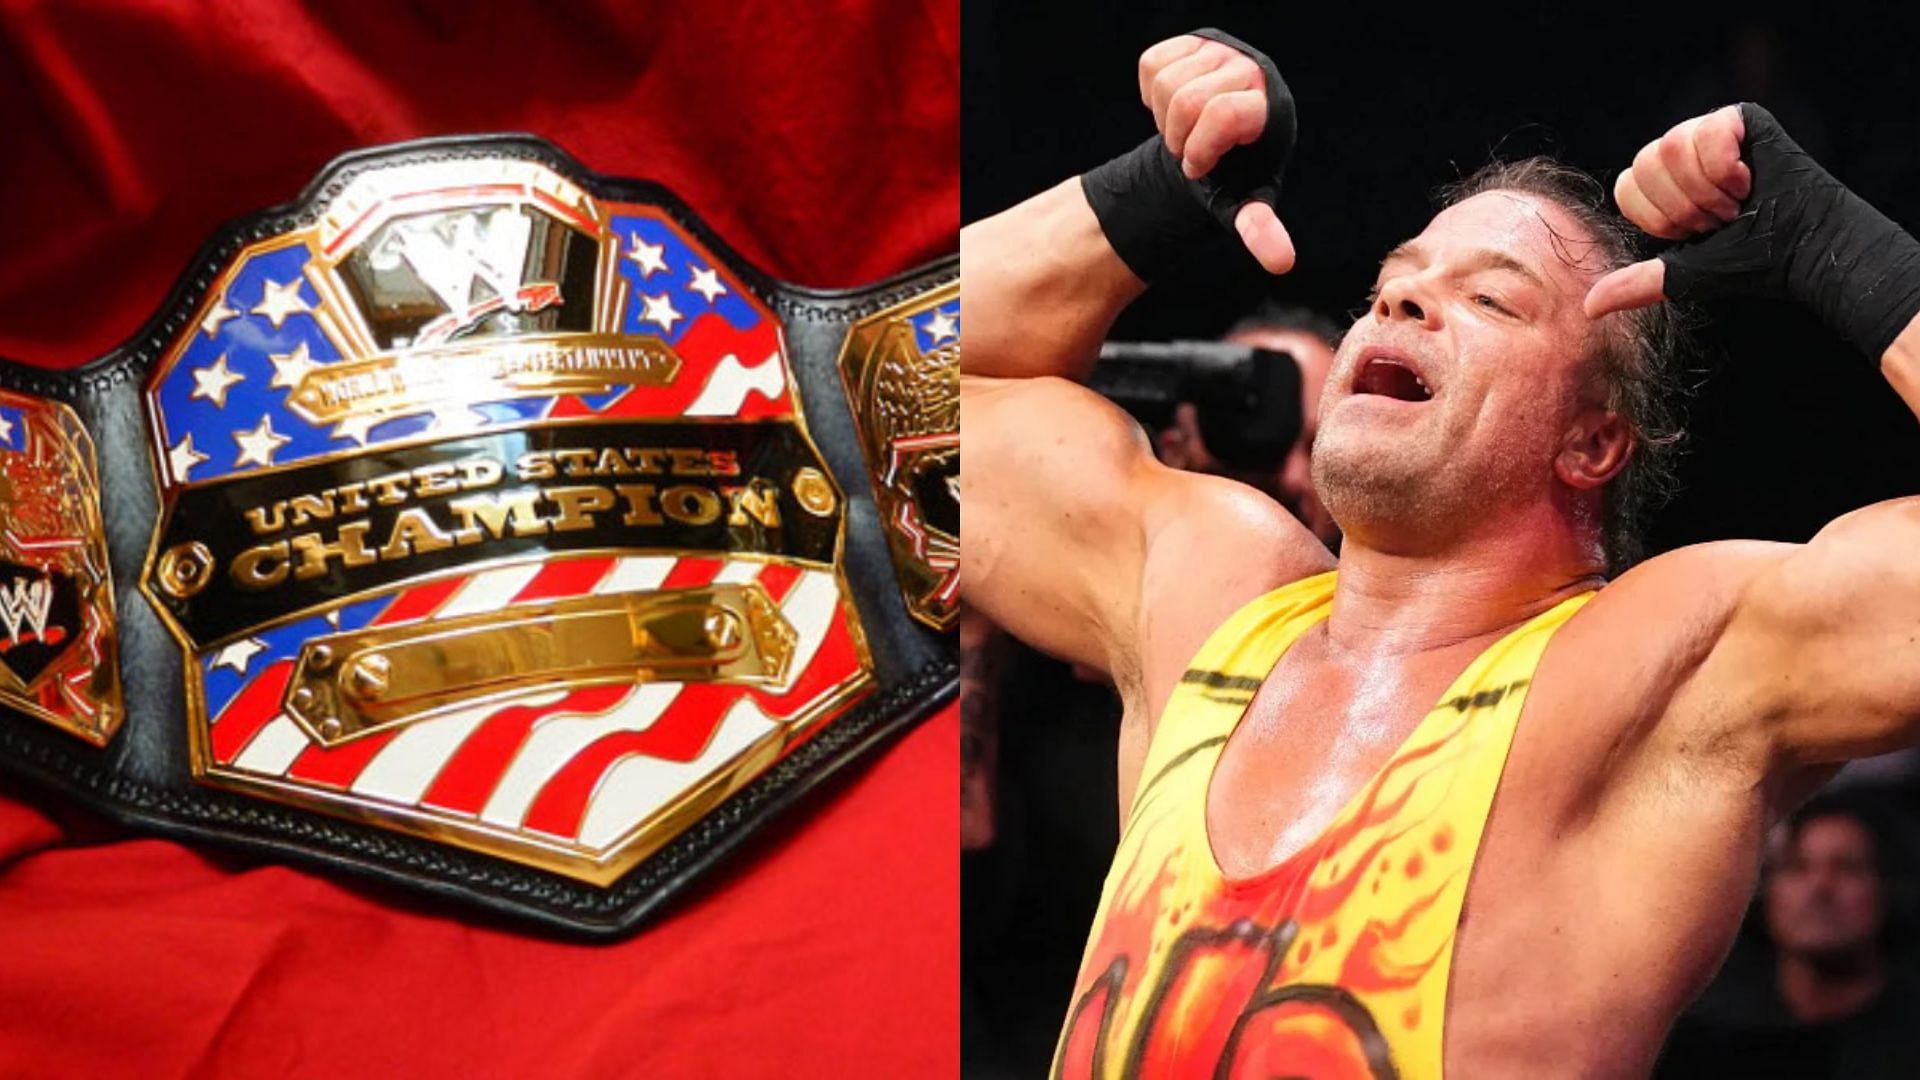 Rob Van Dam has a lot of respect for this former US Champion.